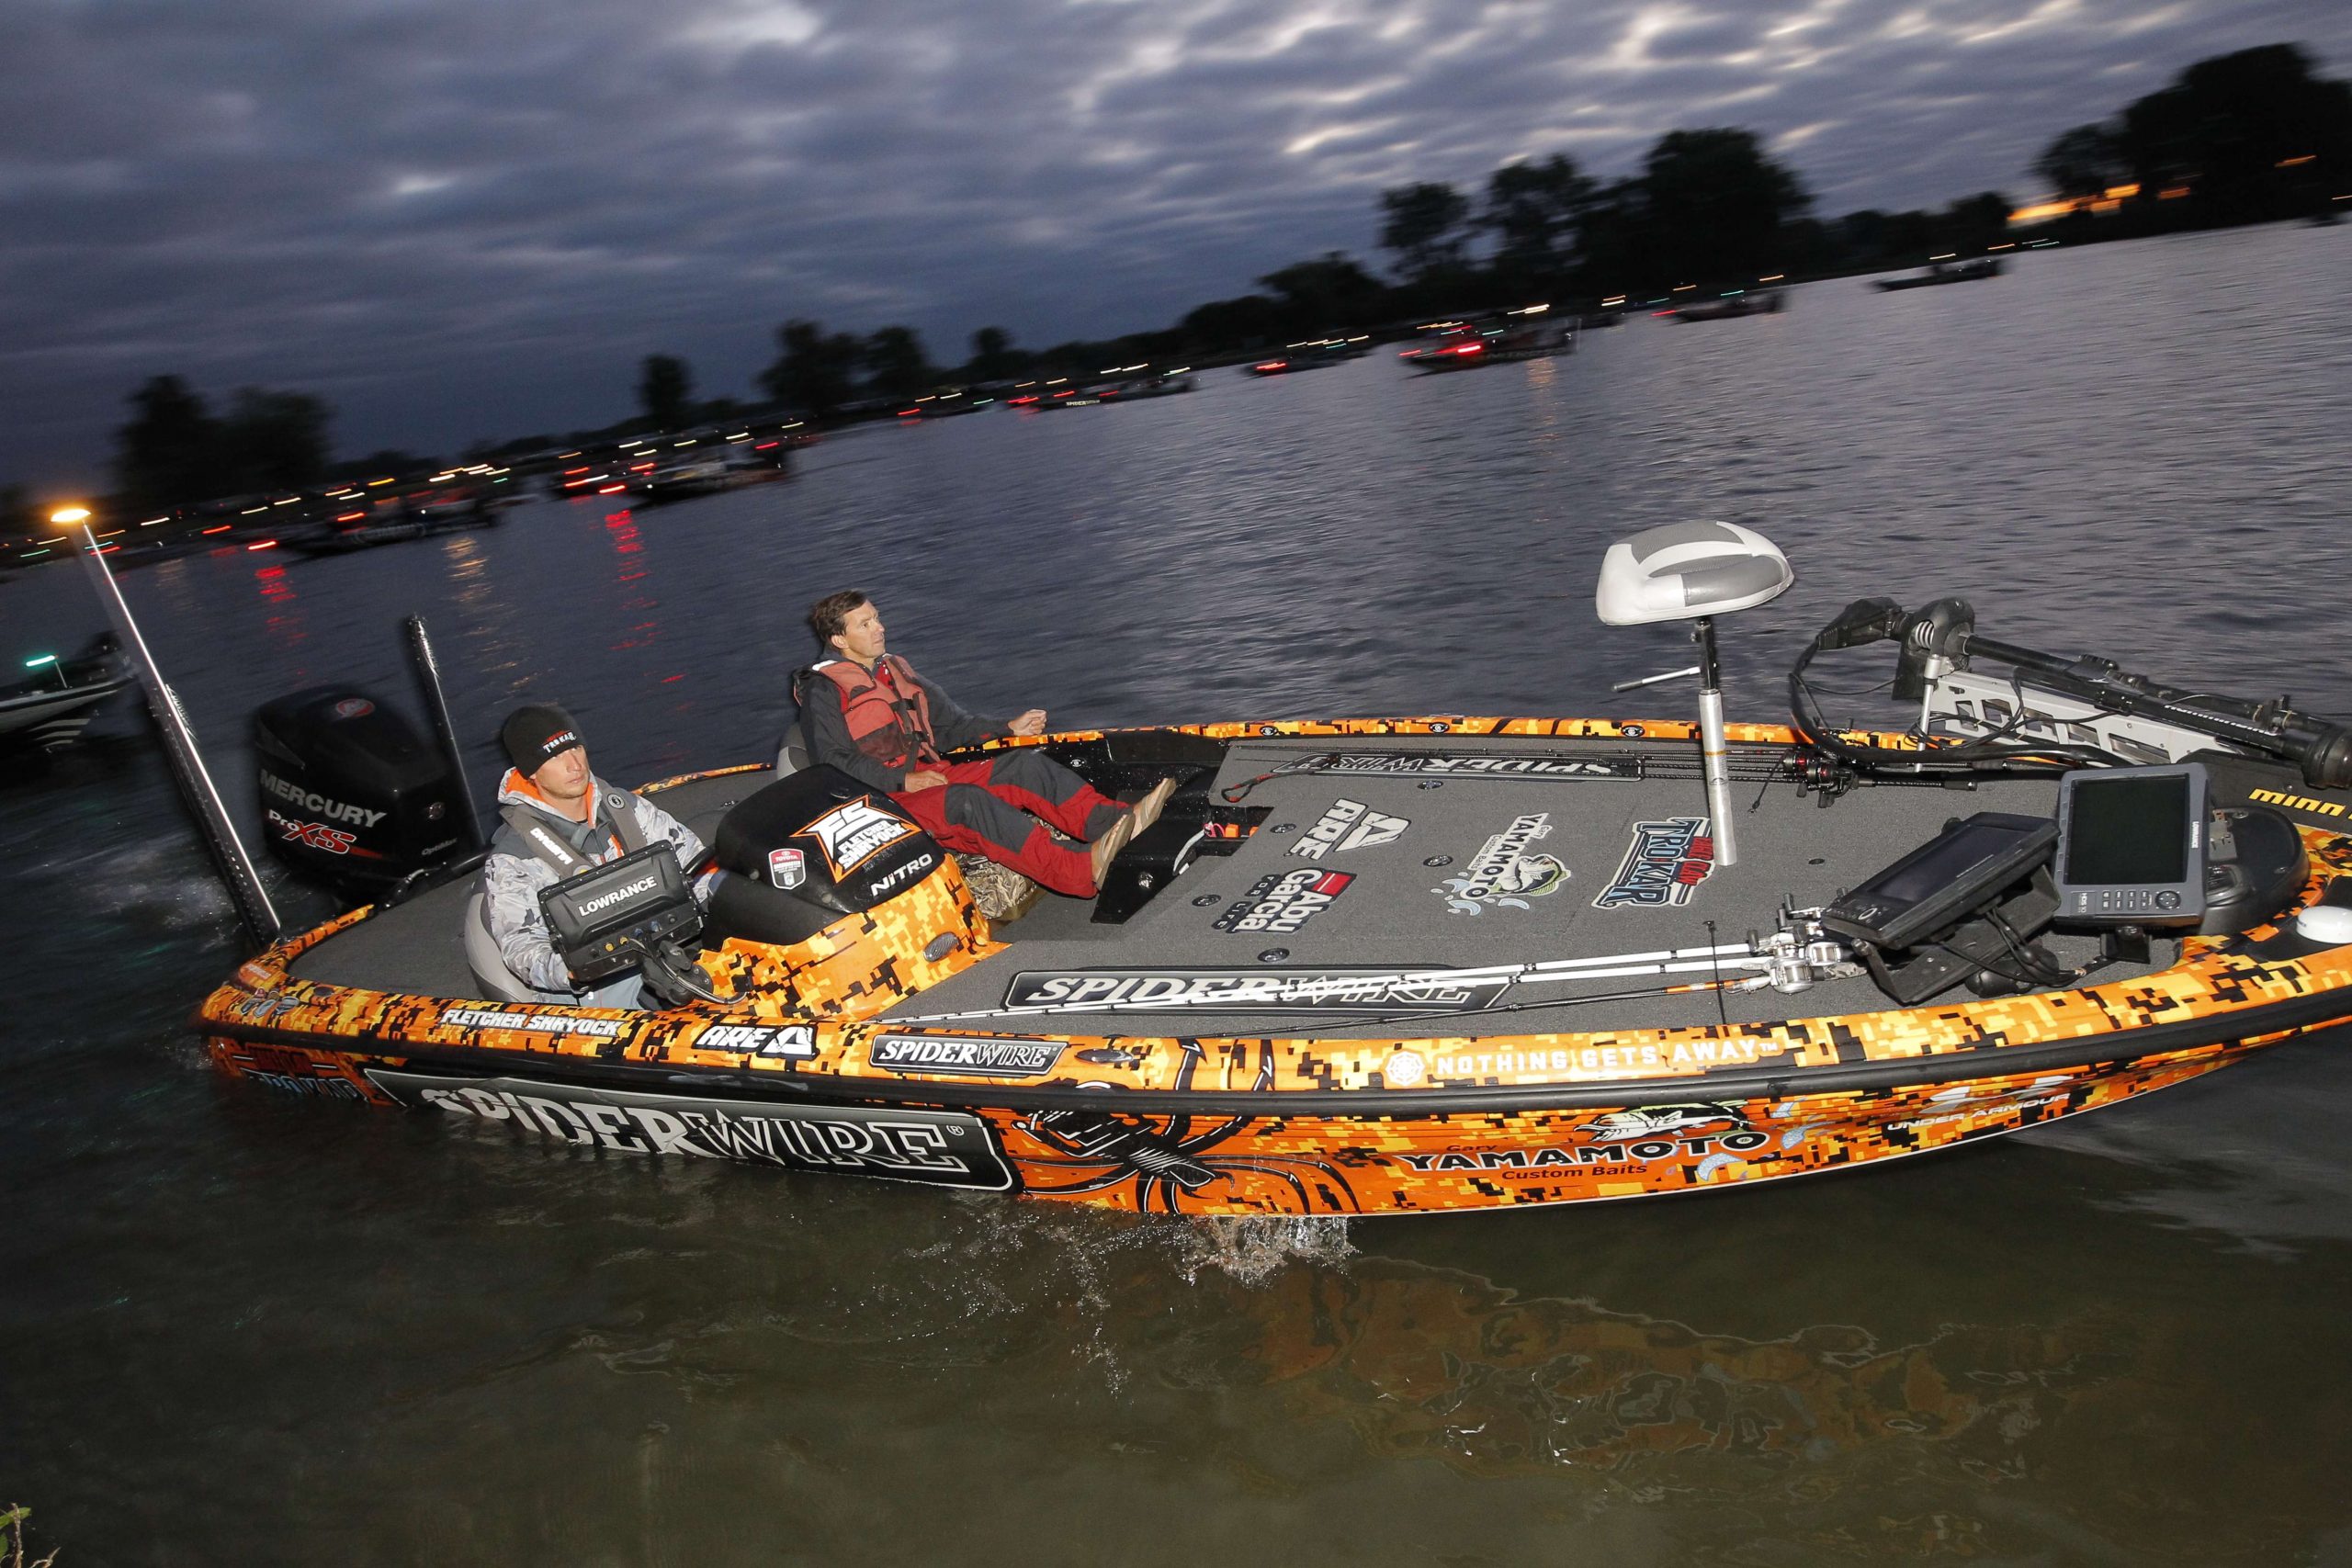 Ohio-native Fletcher Shyrock is the next angler to head out.